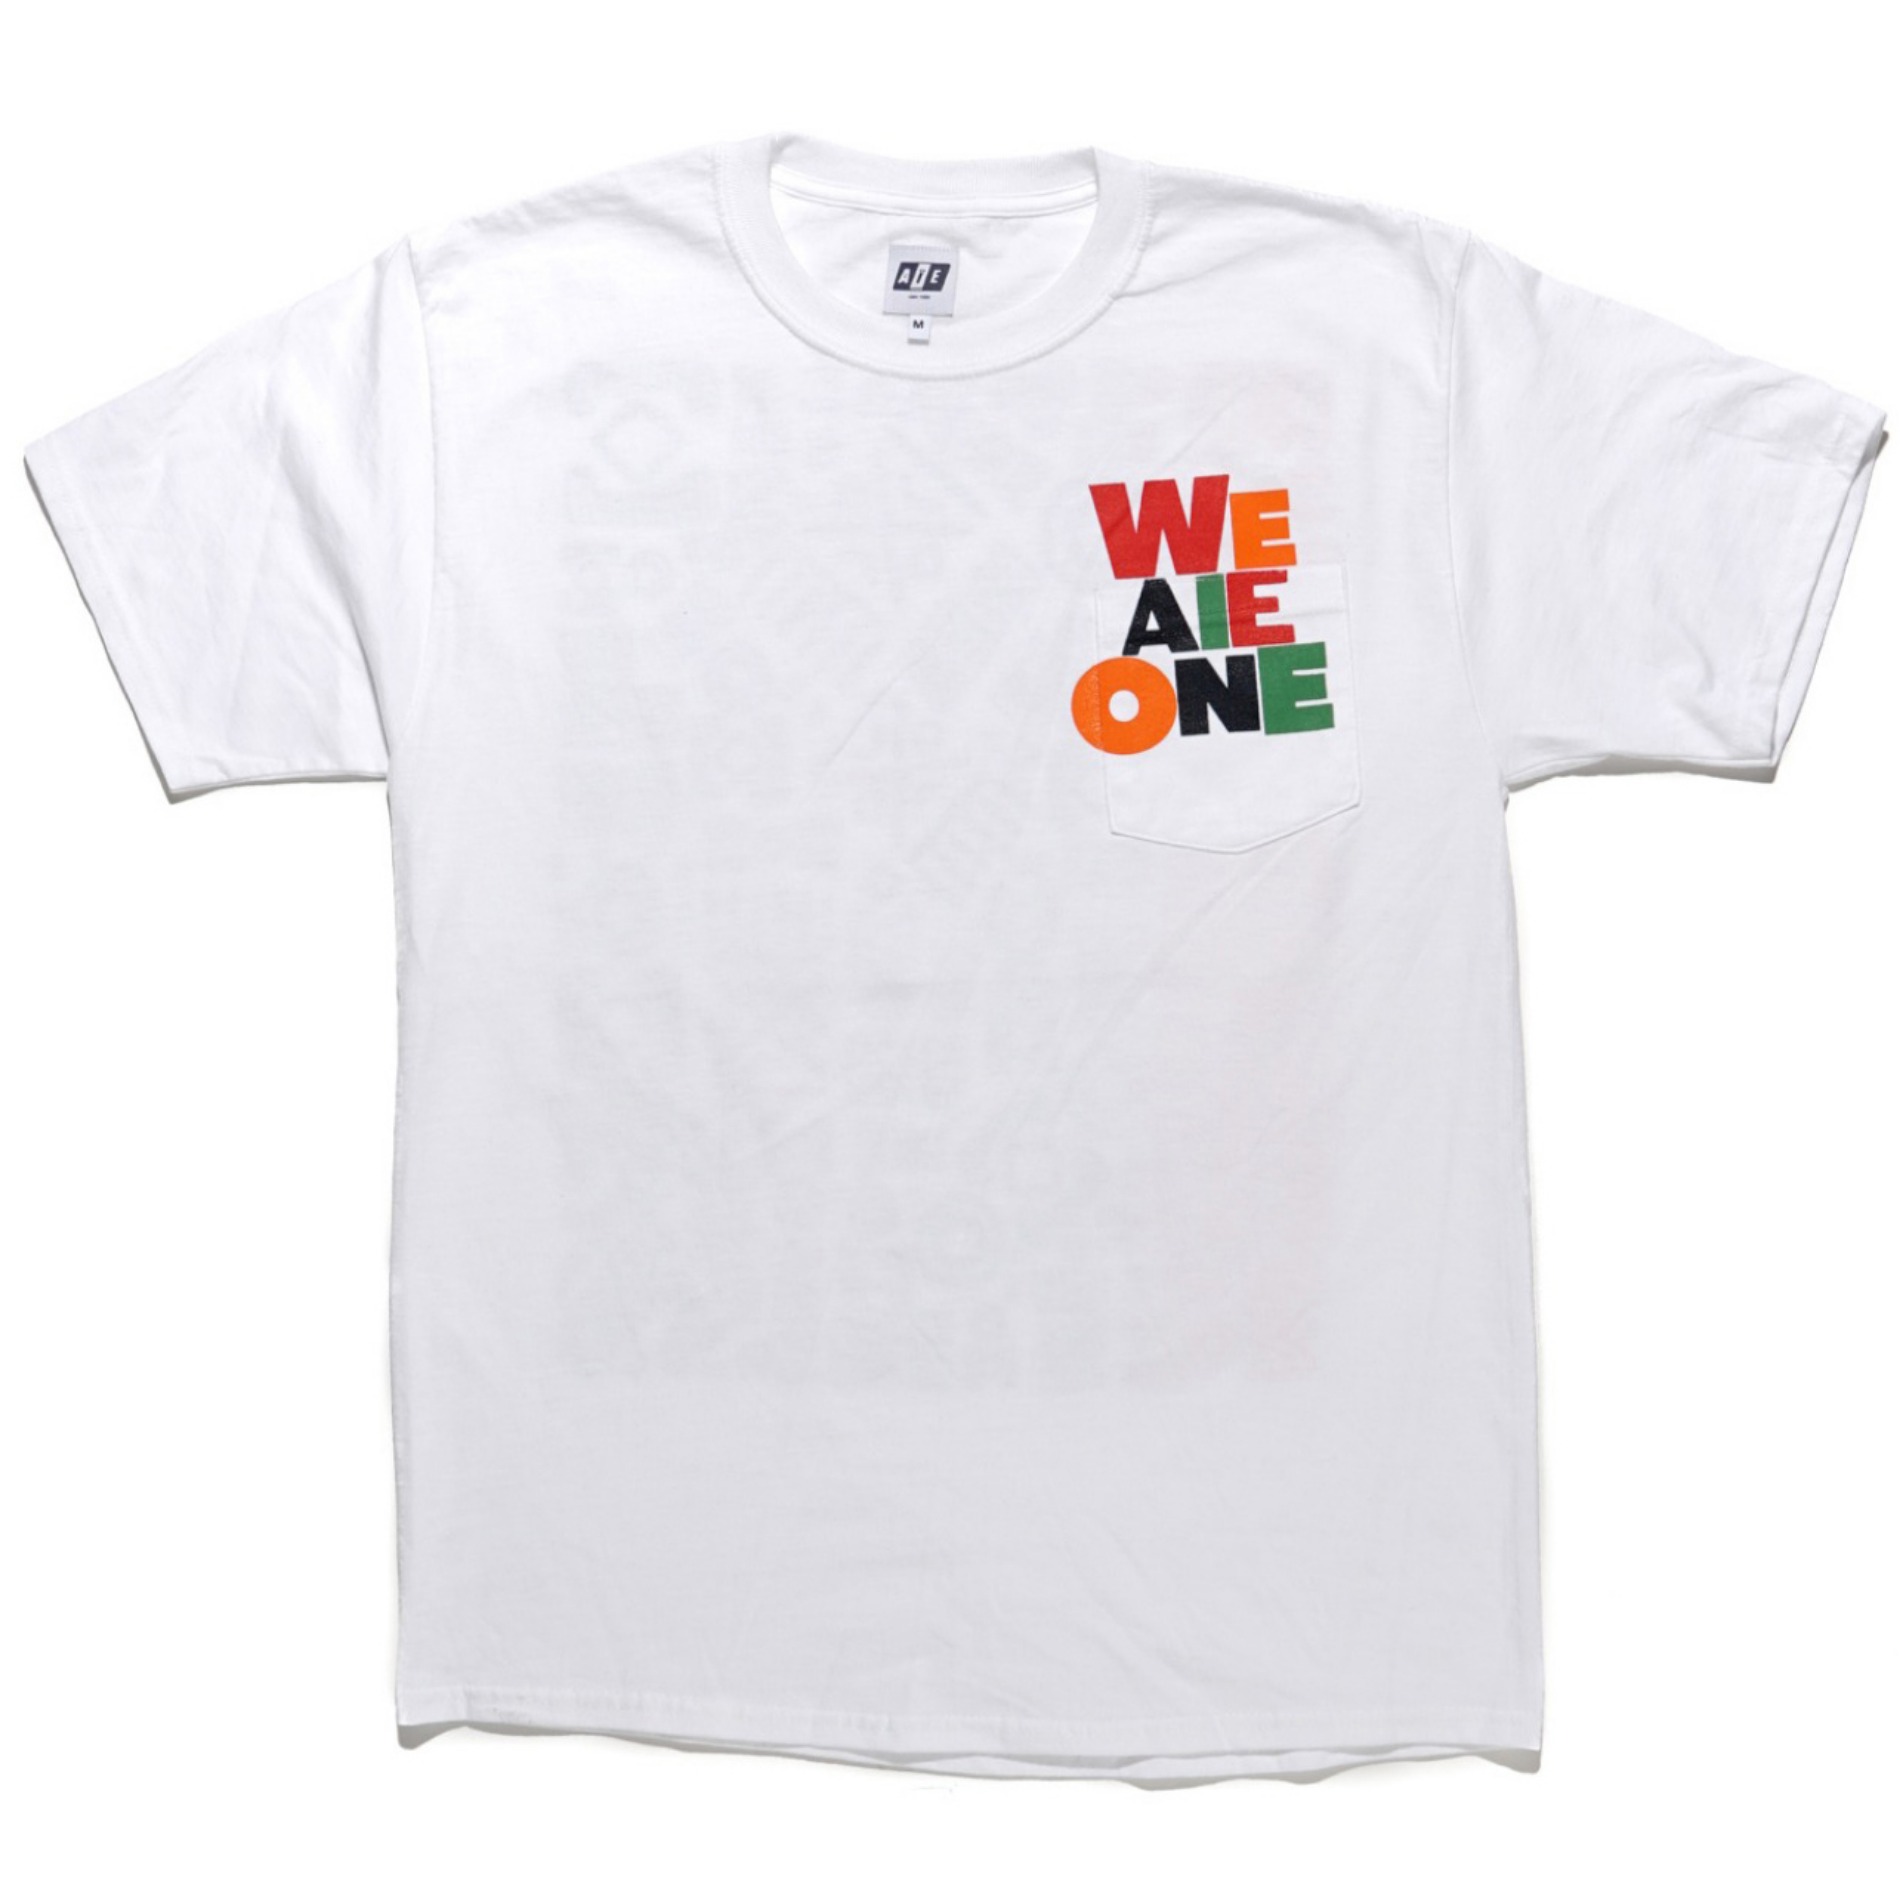 AIE / PRINTED WE AIE ONE S/S POCKET TEE WHITE